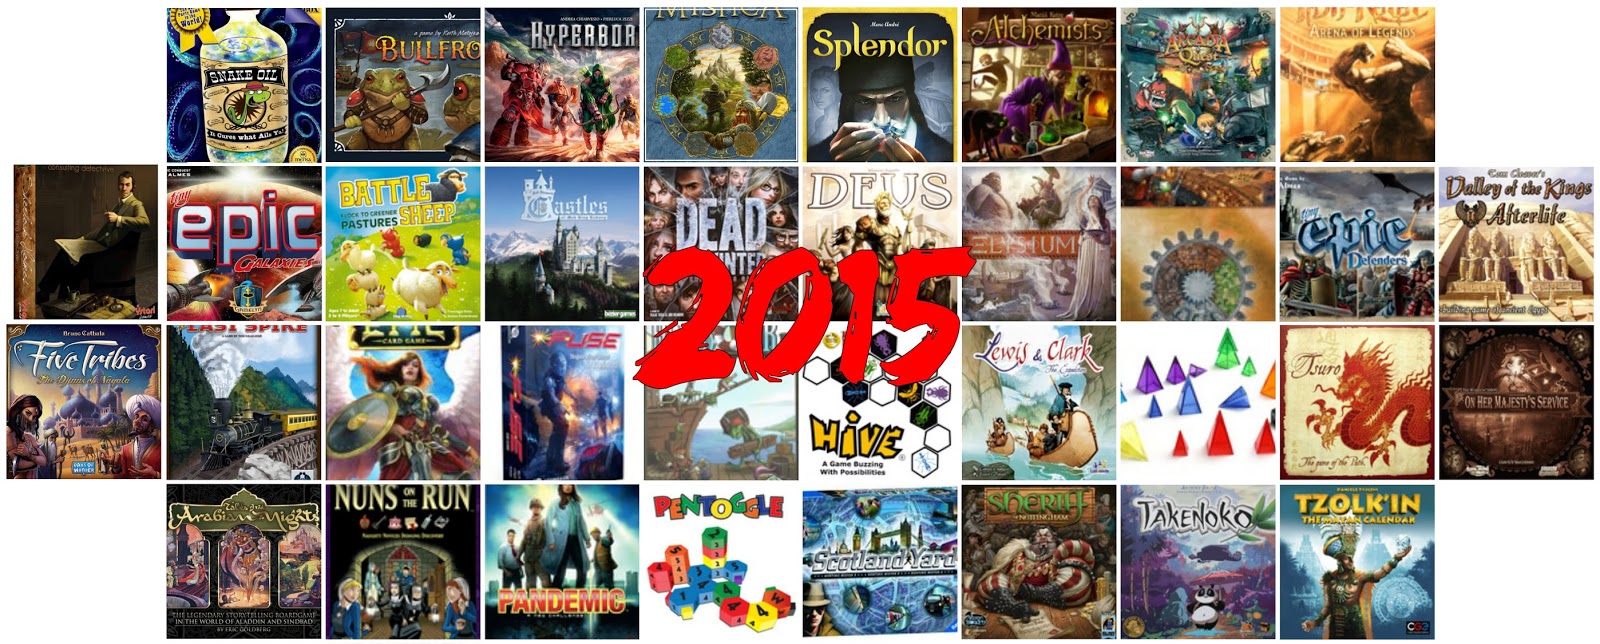 2015 was the best year ever for games